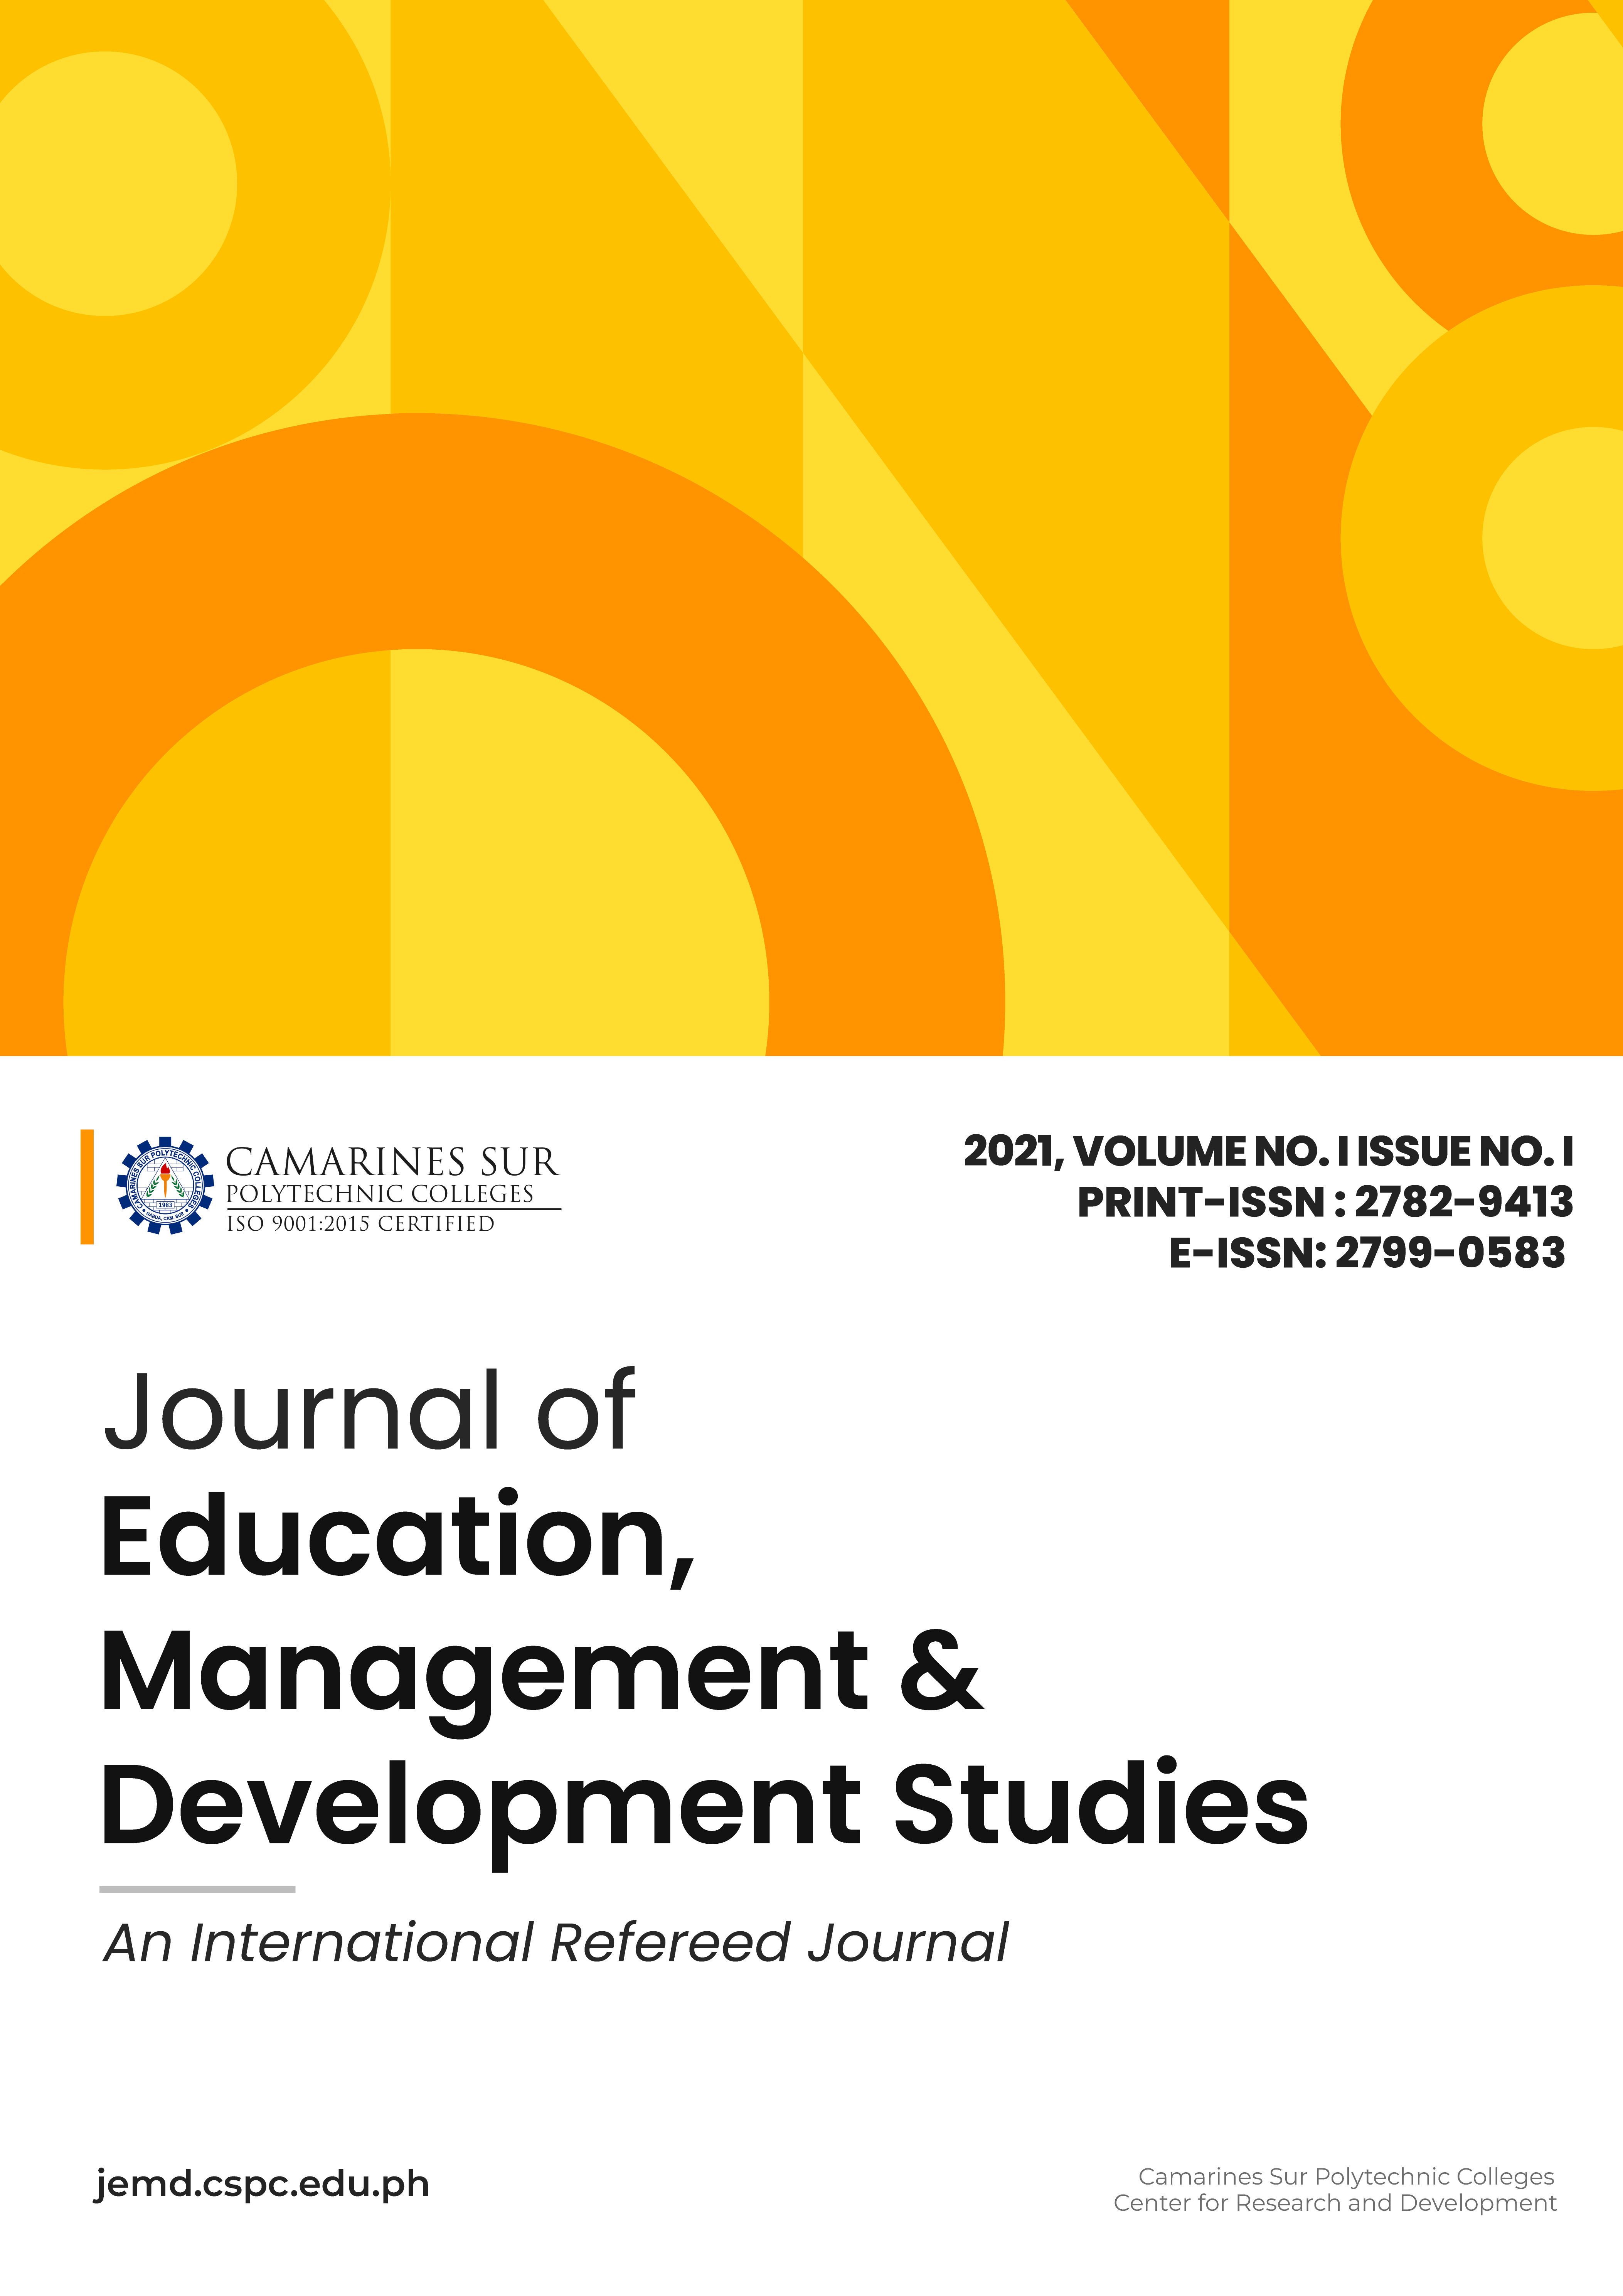 Journal of Education, Management and Development Studies Vol. 1 No. 1 (2021): June Issue